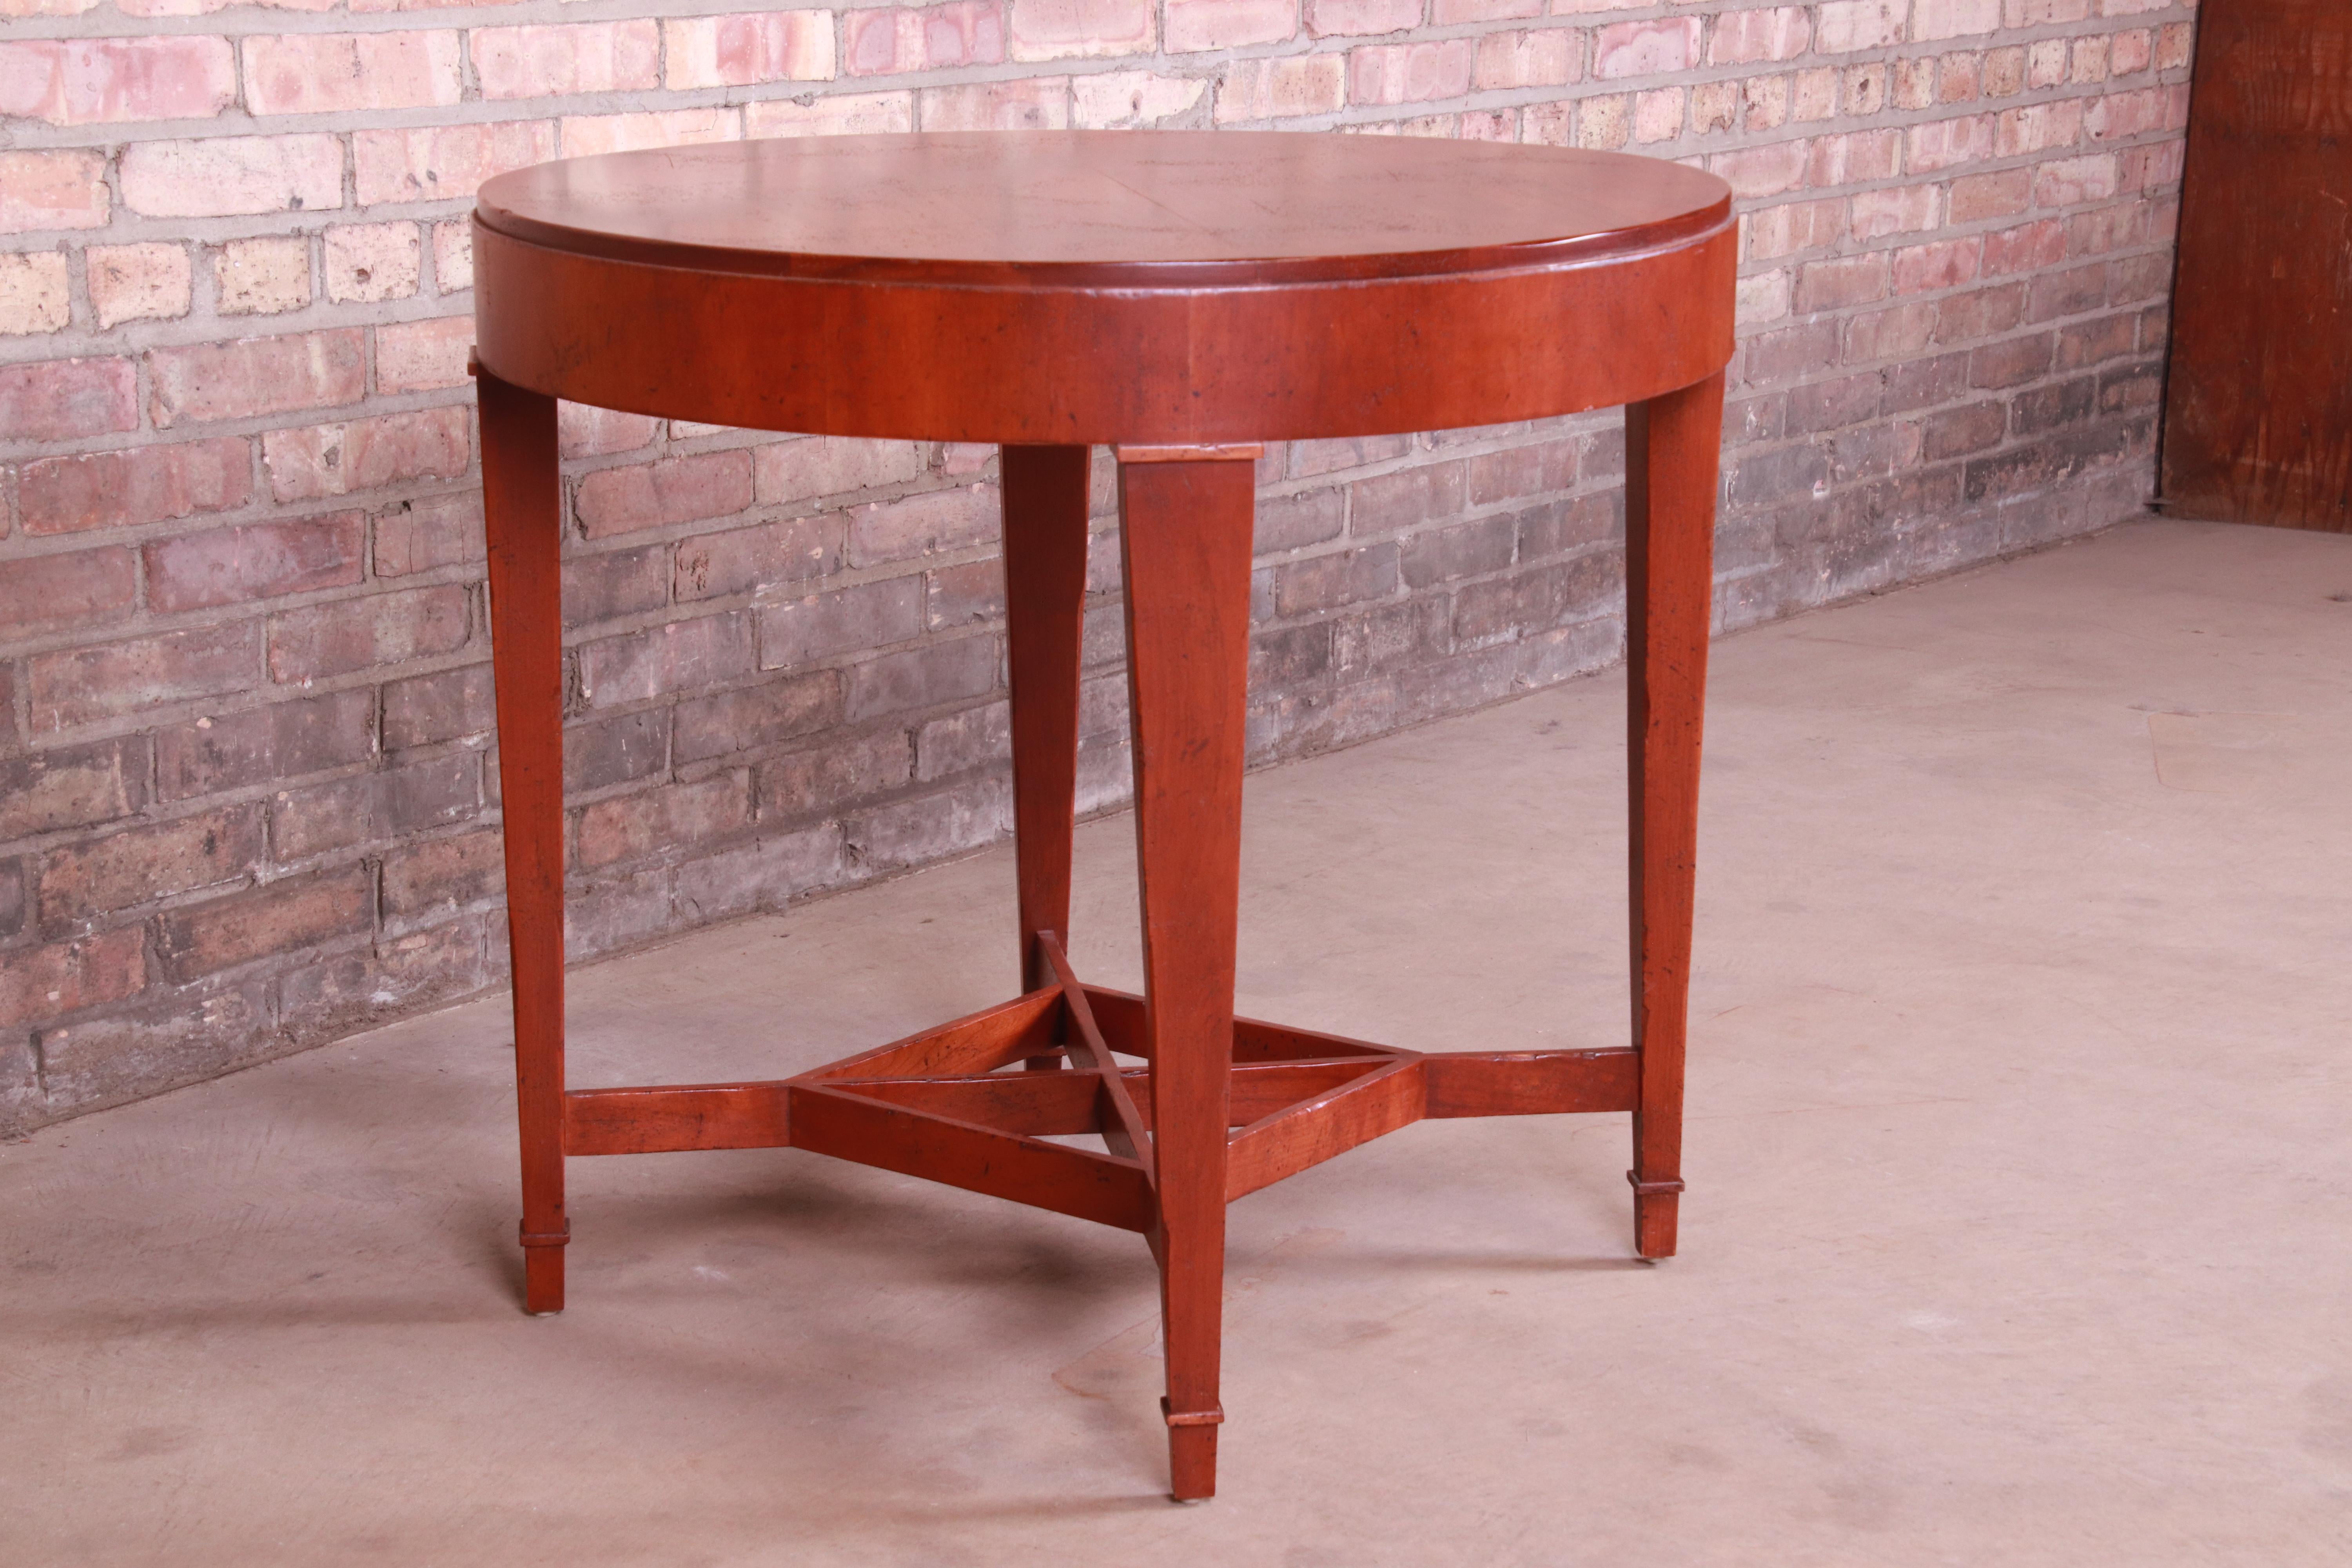 20th Century Baker Furniture Milling Road Carved Cherrywood Tea Table or Occasional Table